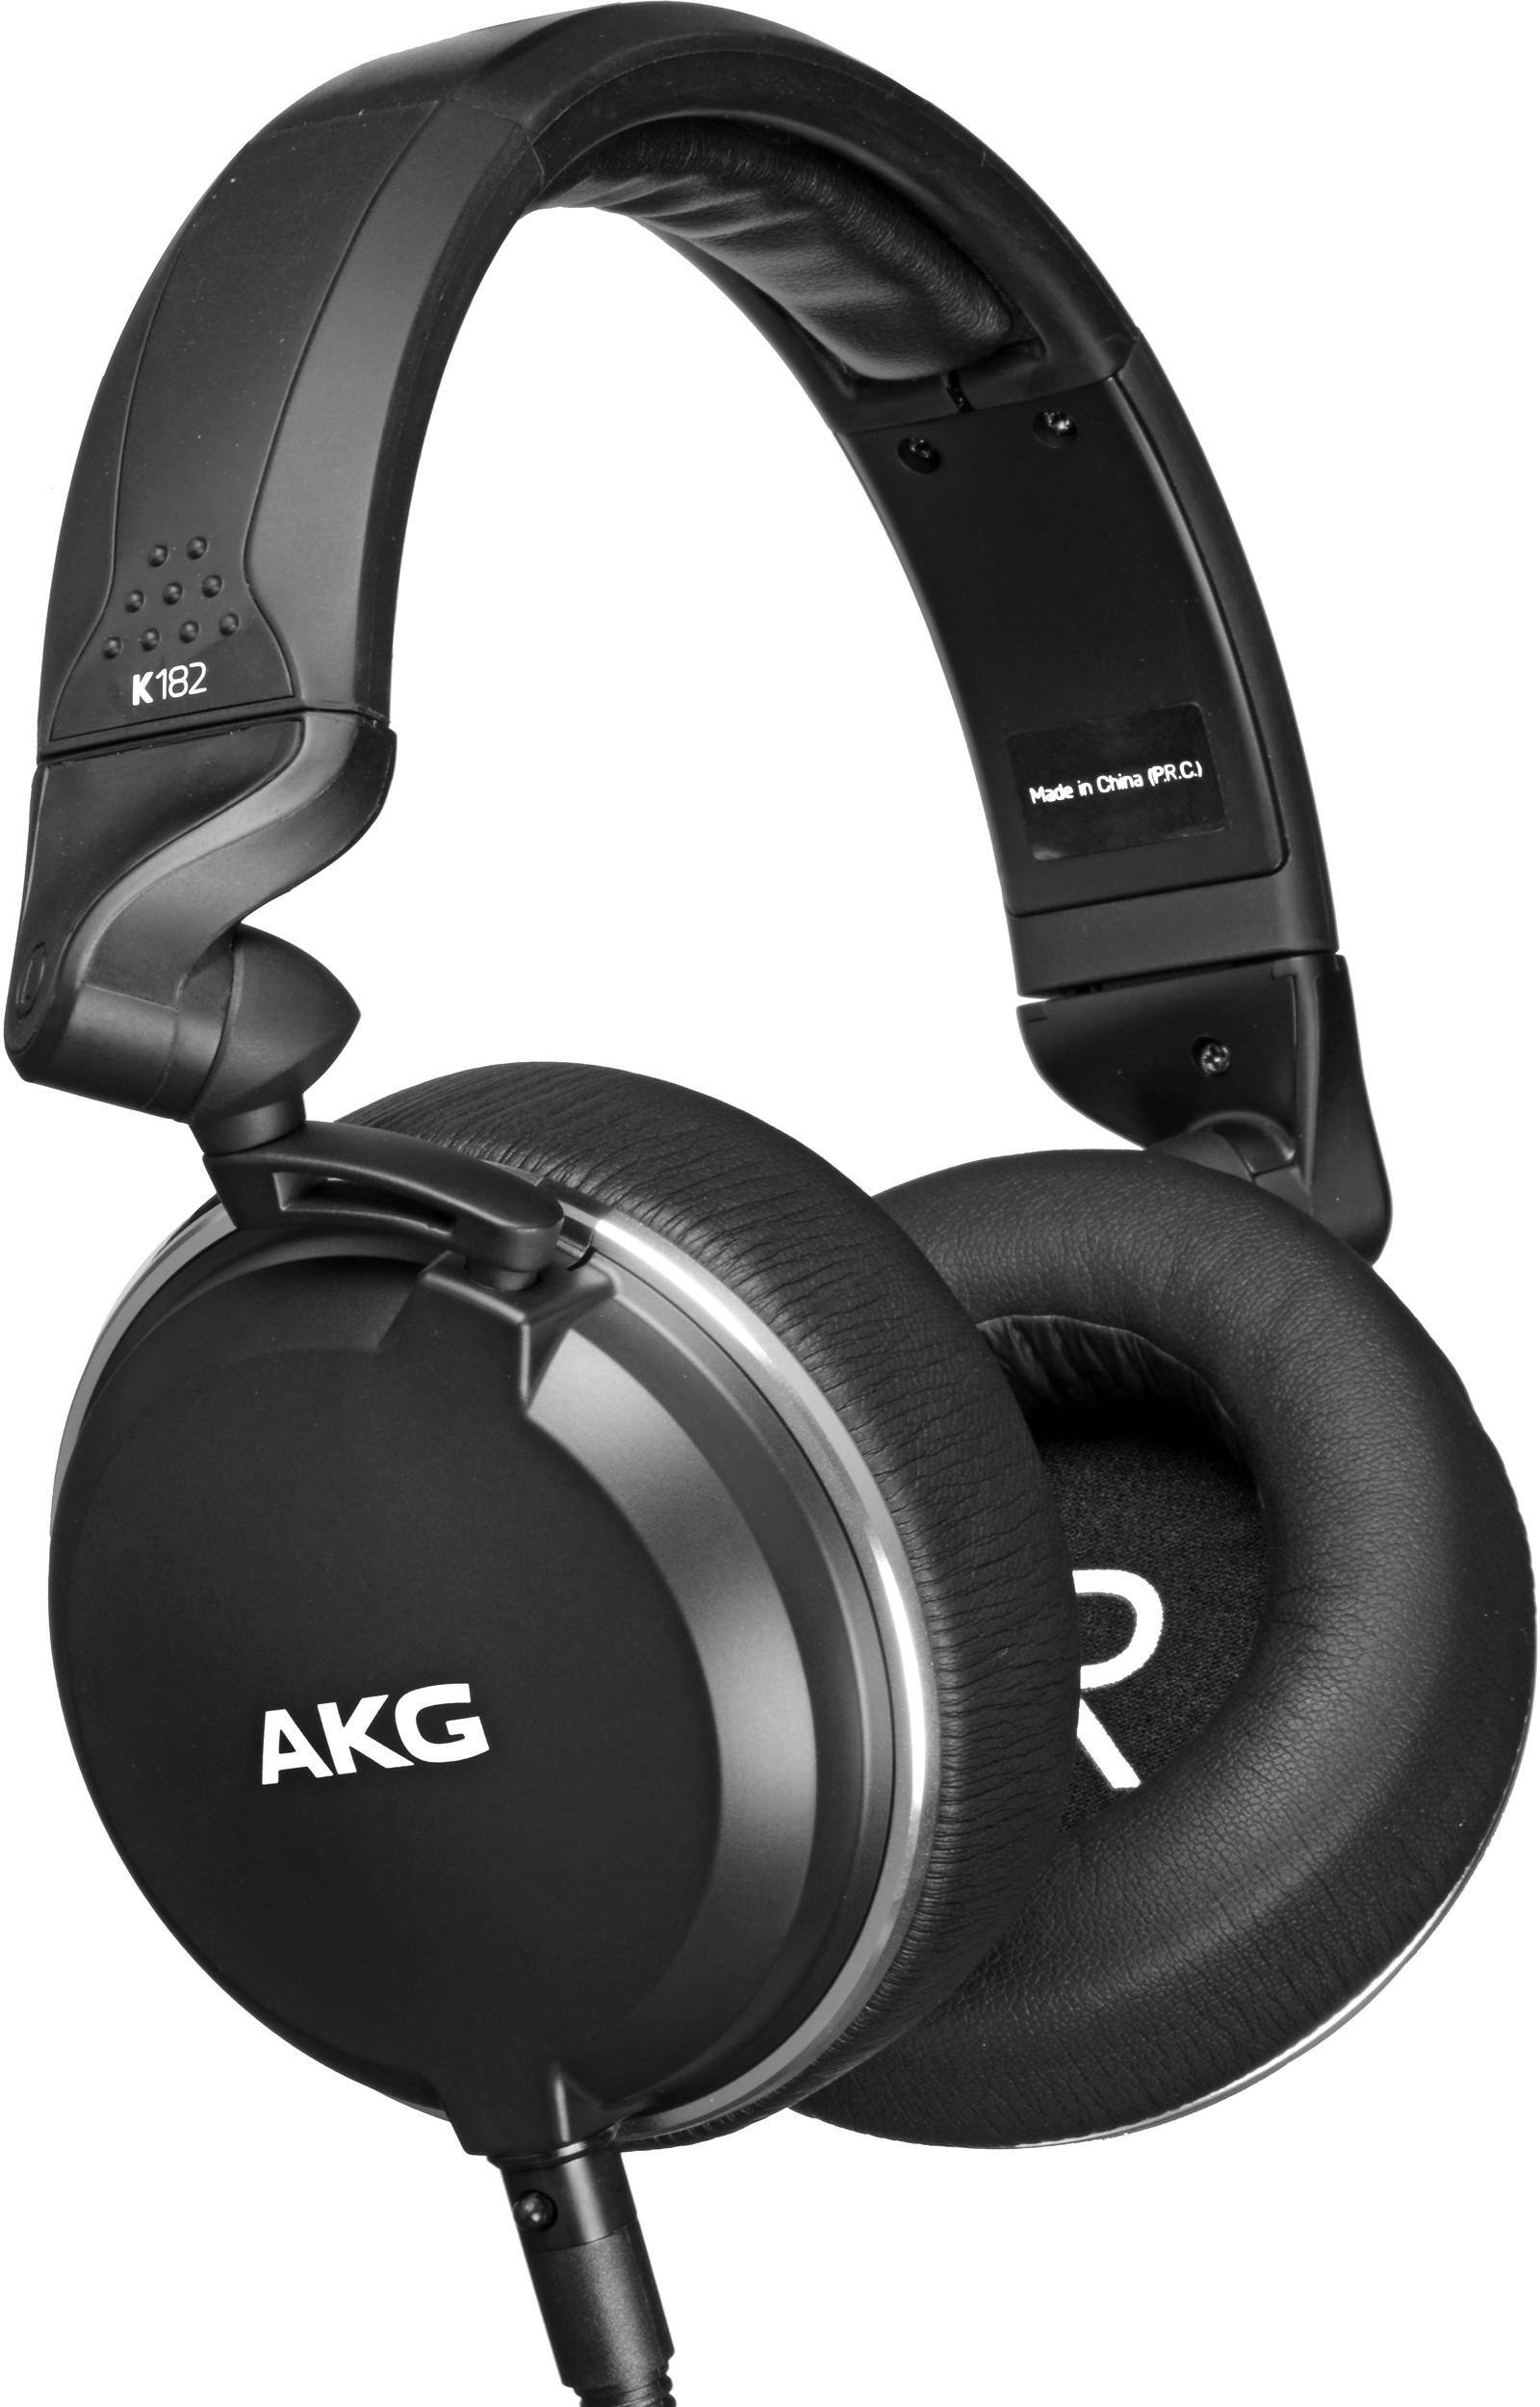 Akg K182 - Closed headset - Main picture